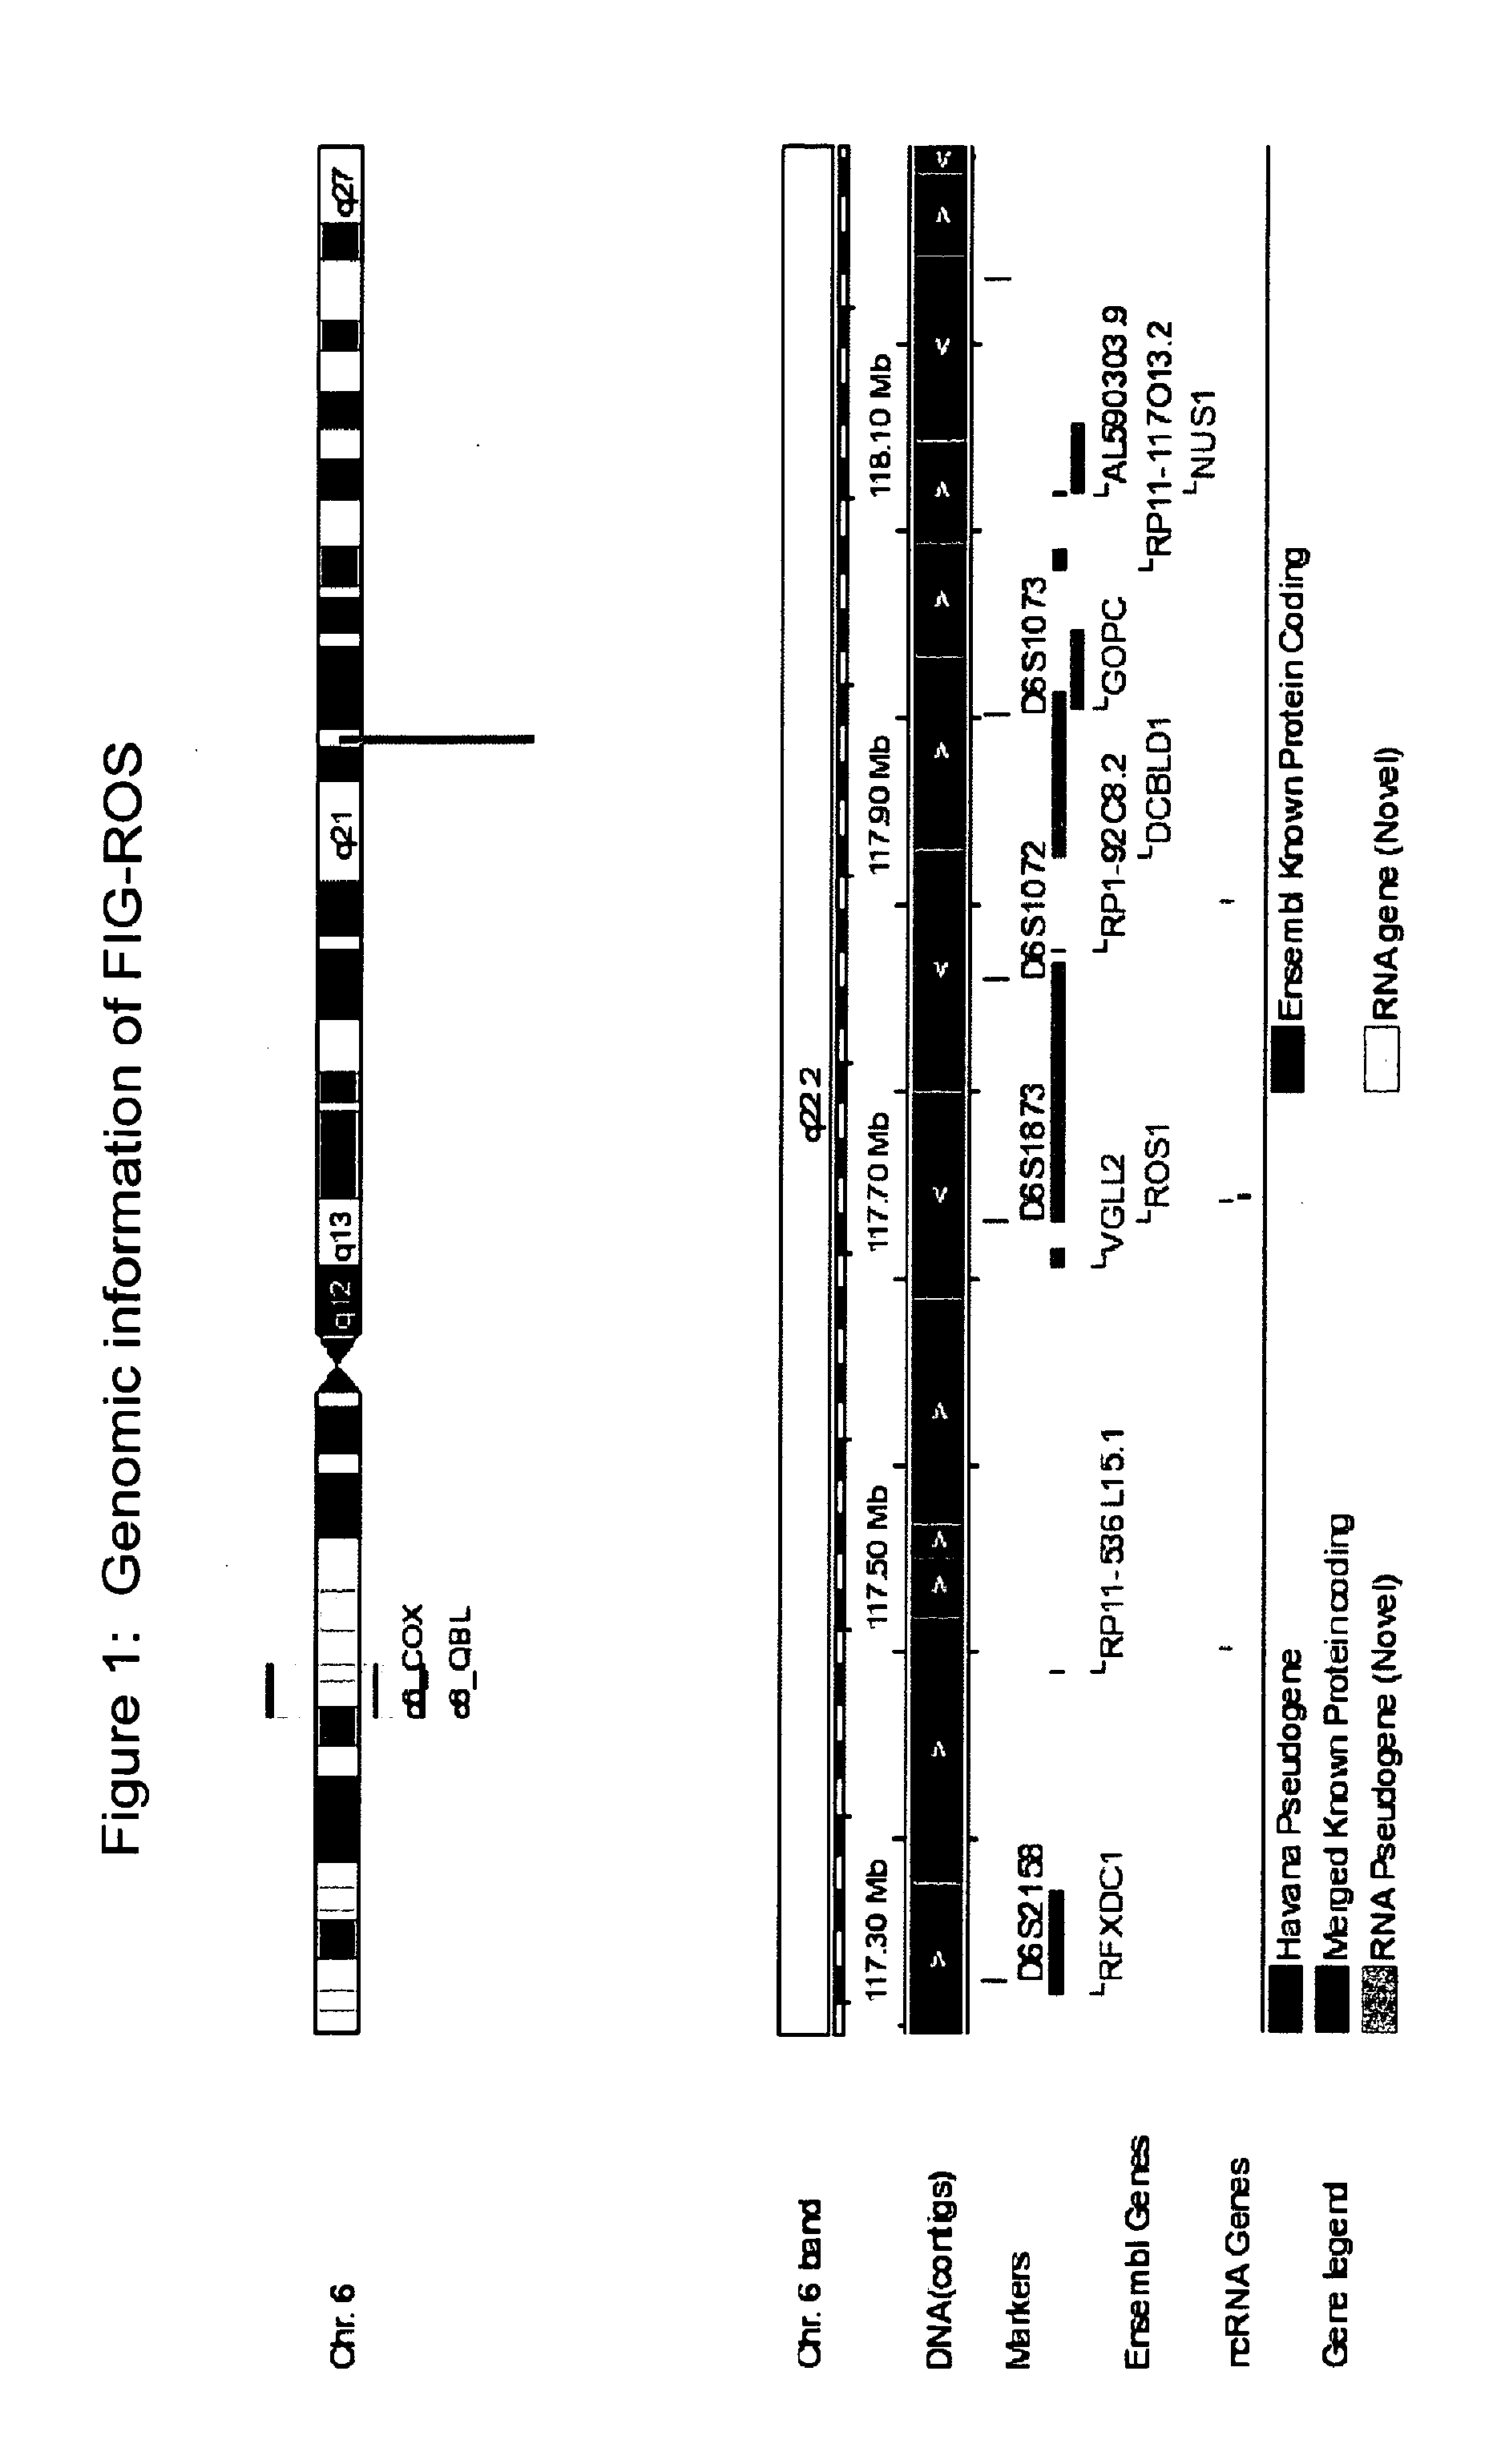 Mutant ROS Expression In Human Cancer